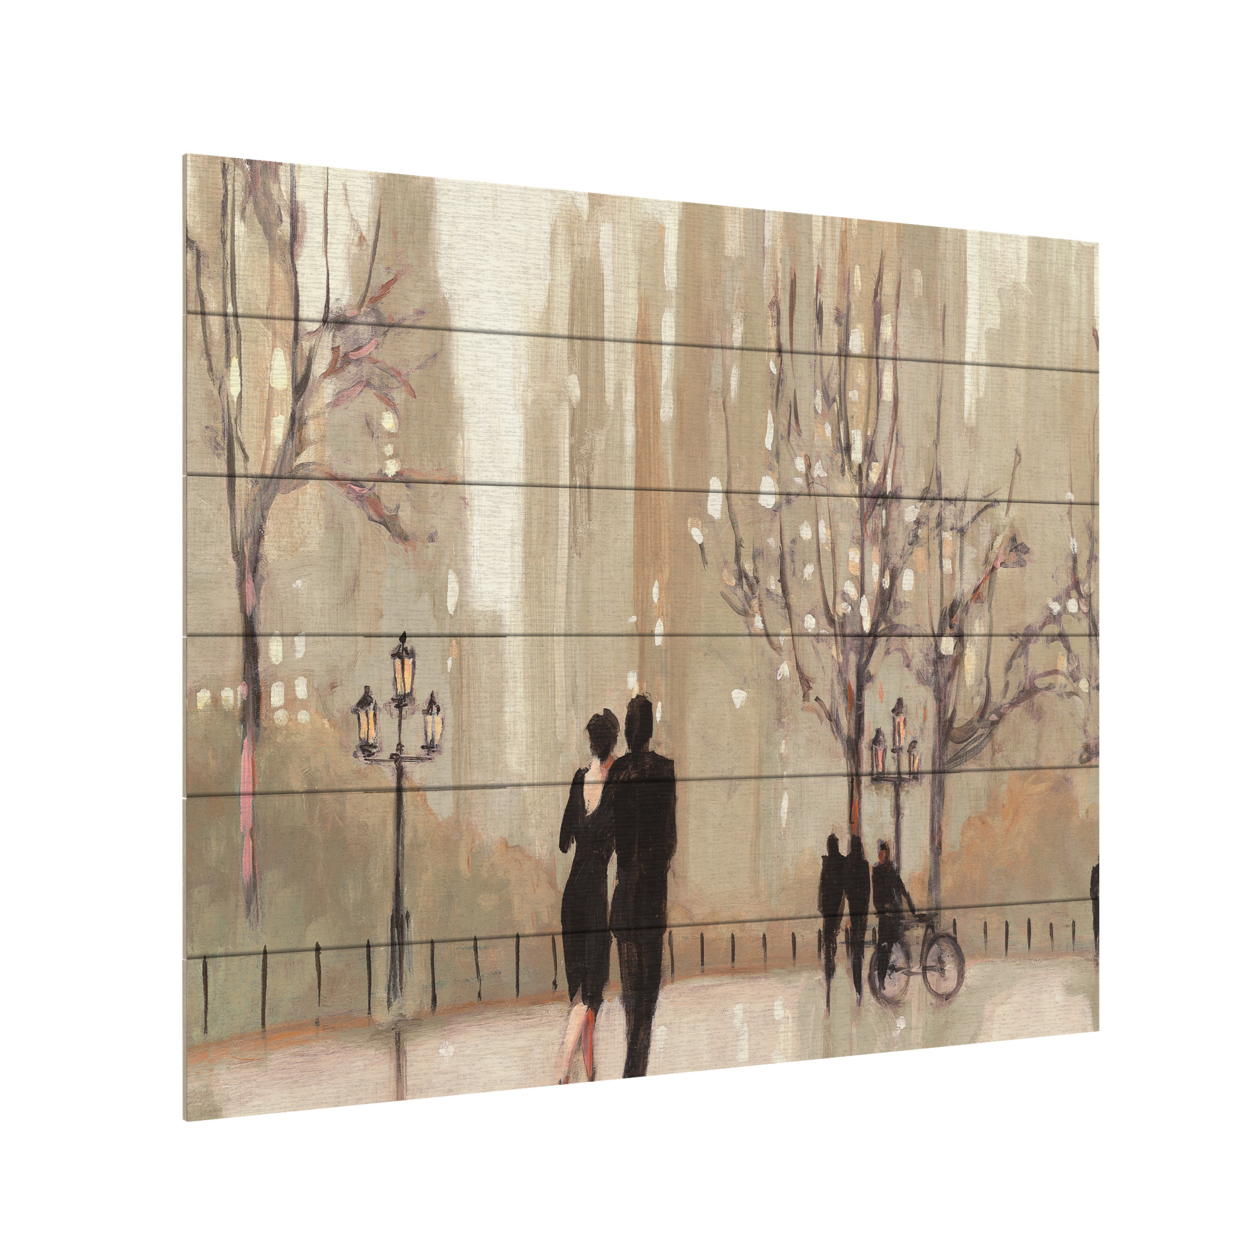 Wooden Slat Art 18 X 22 Inches Titled An Evening Out Neutral Ready To Hang Home Decor Picture